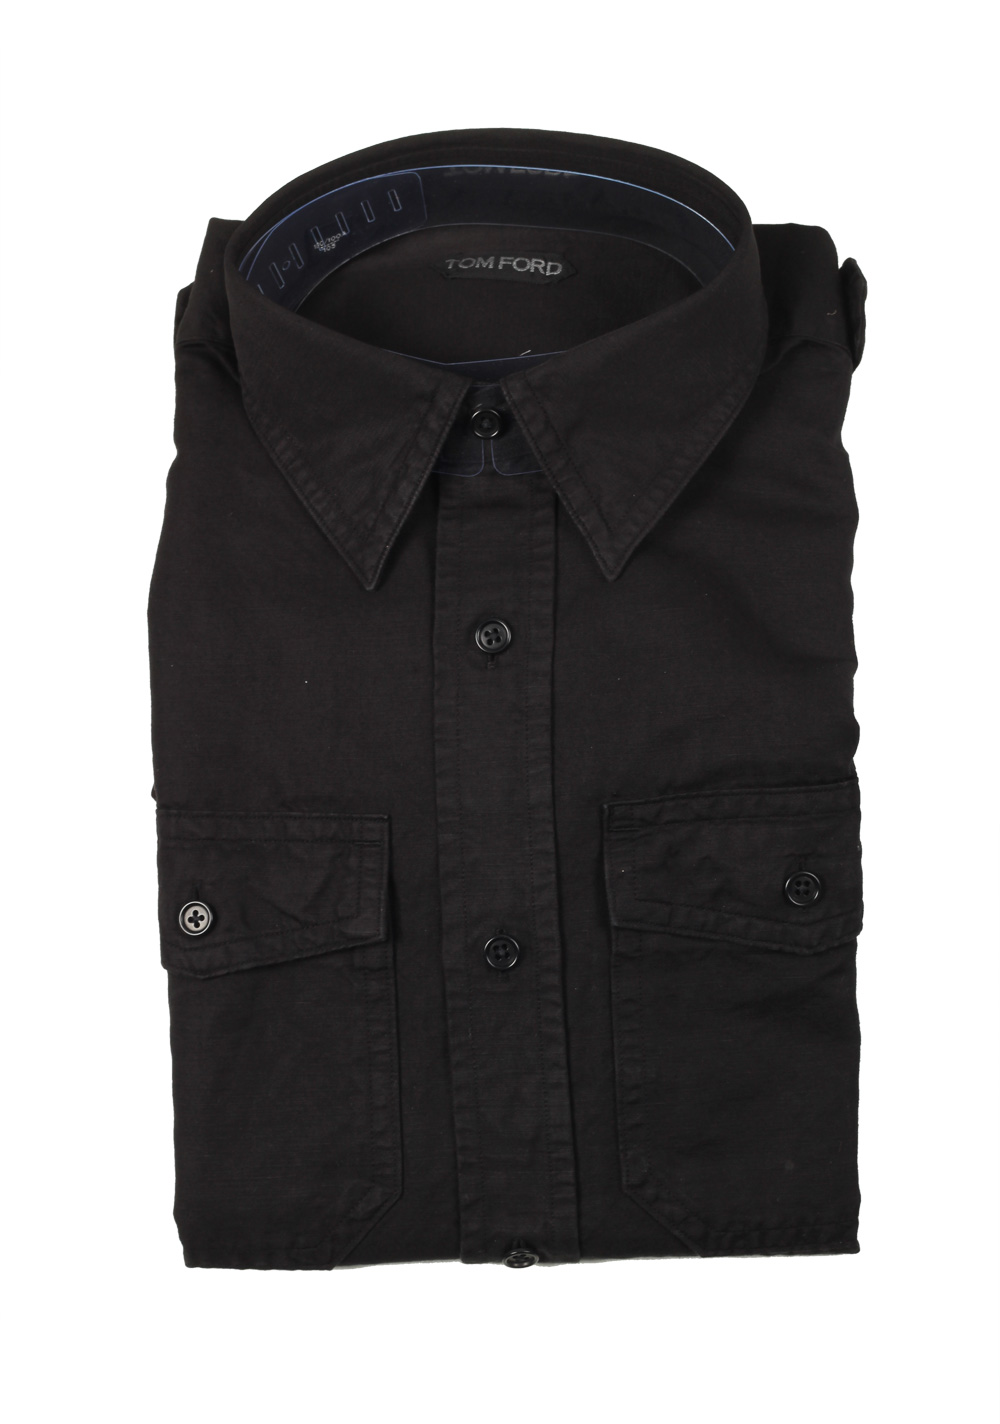 TOM FORD Solid Black Casual Shirt Size 42 / 16,5 U.S. | Costume Limité